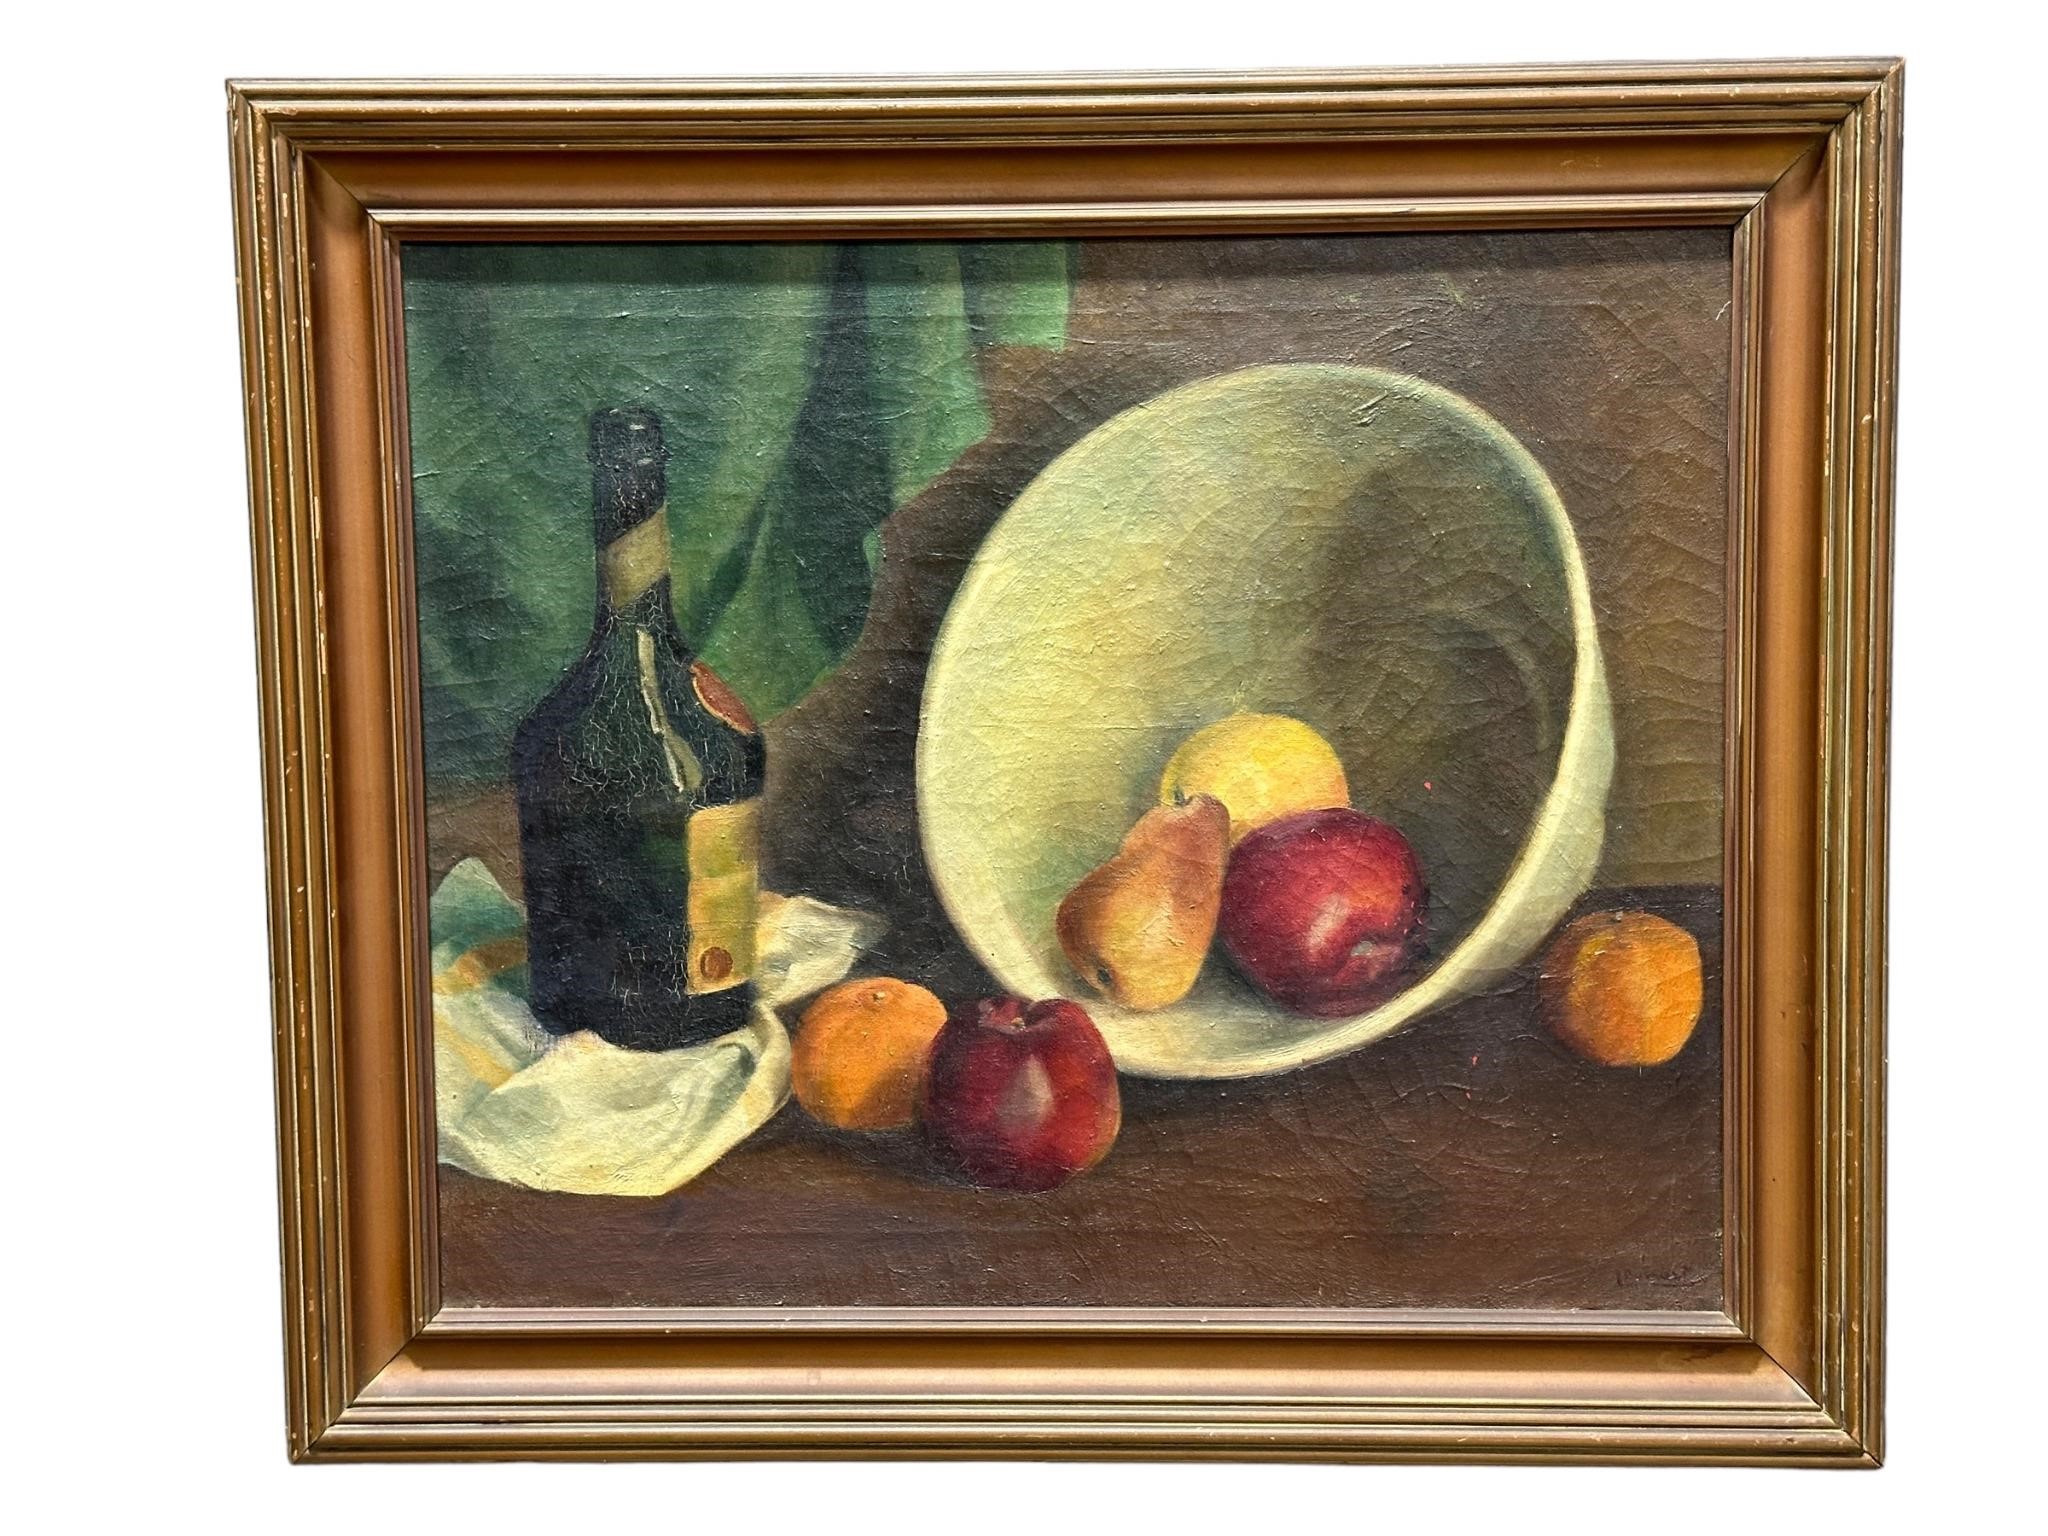 Antique Oil on Canvas Fruit Bowl & Wine Painting